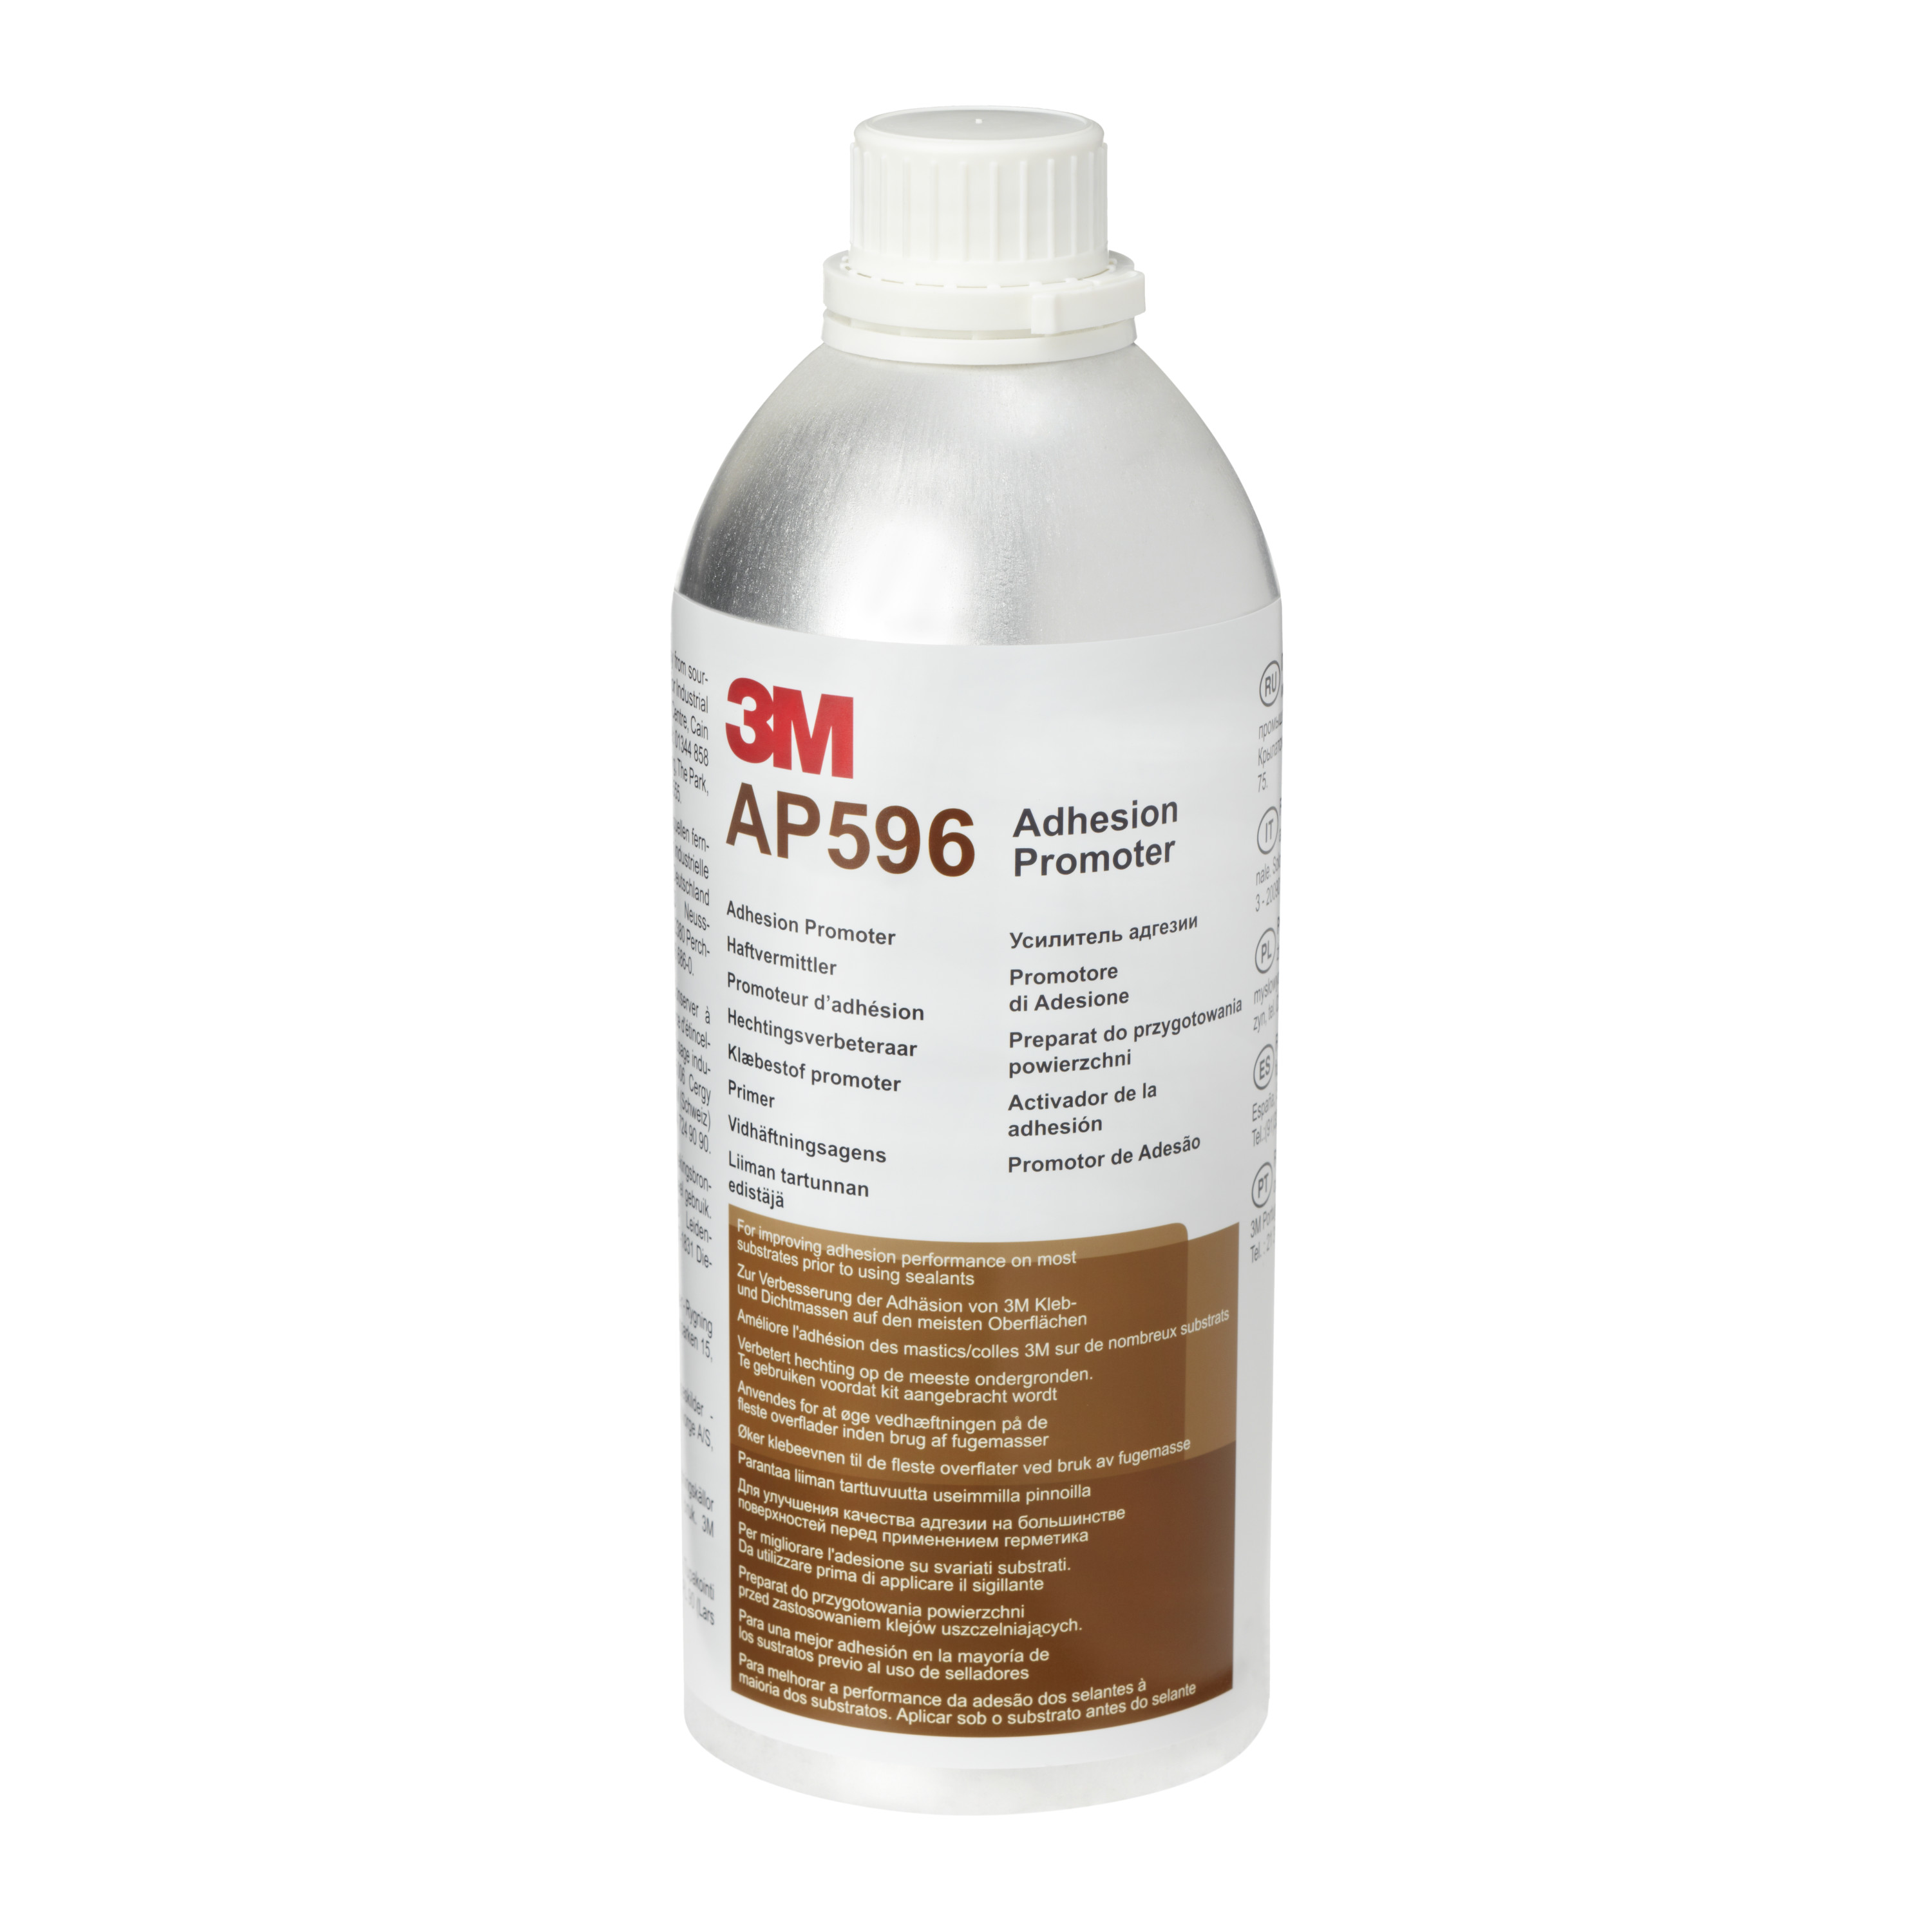 3M™ Adhesion Promoter AP596, Clear, 1000 mL Bottle, 8/Case